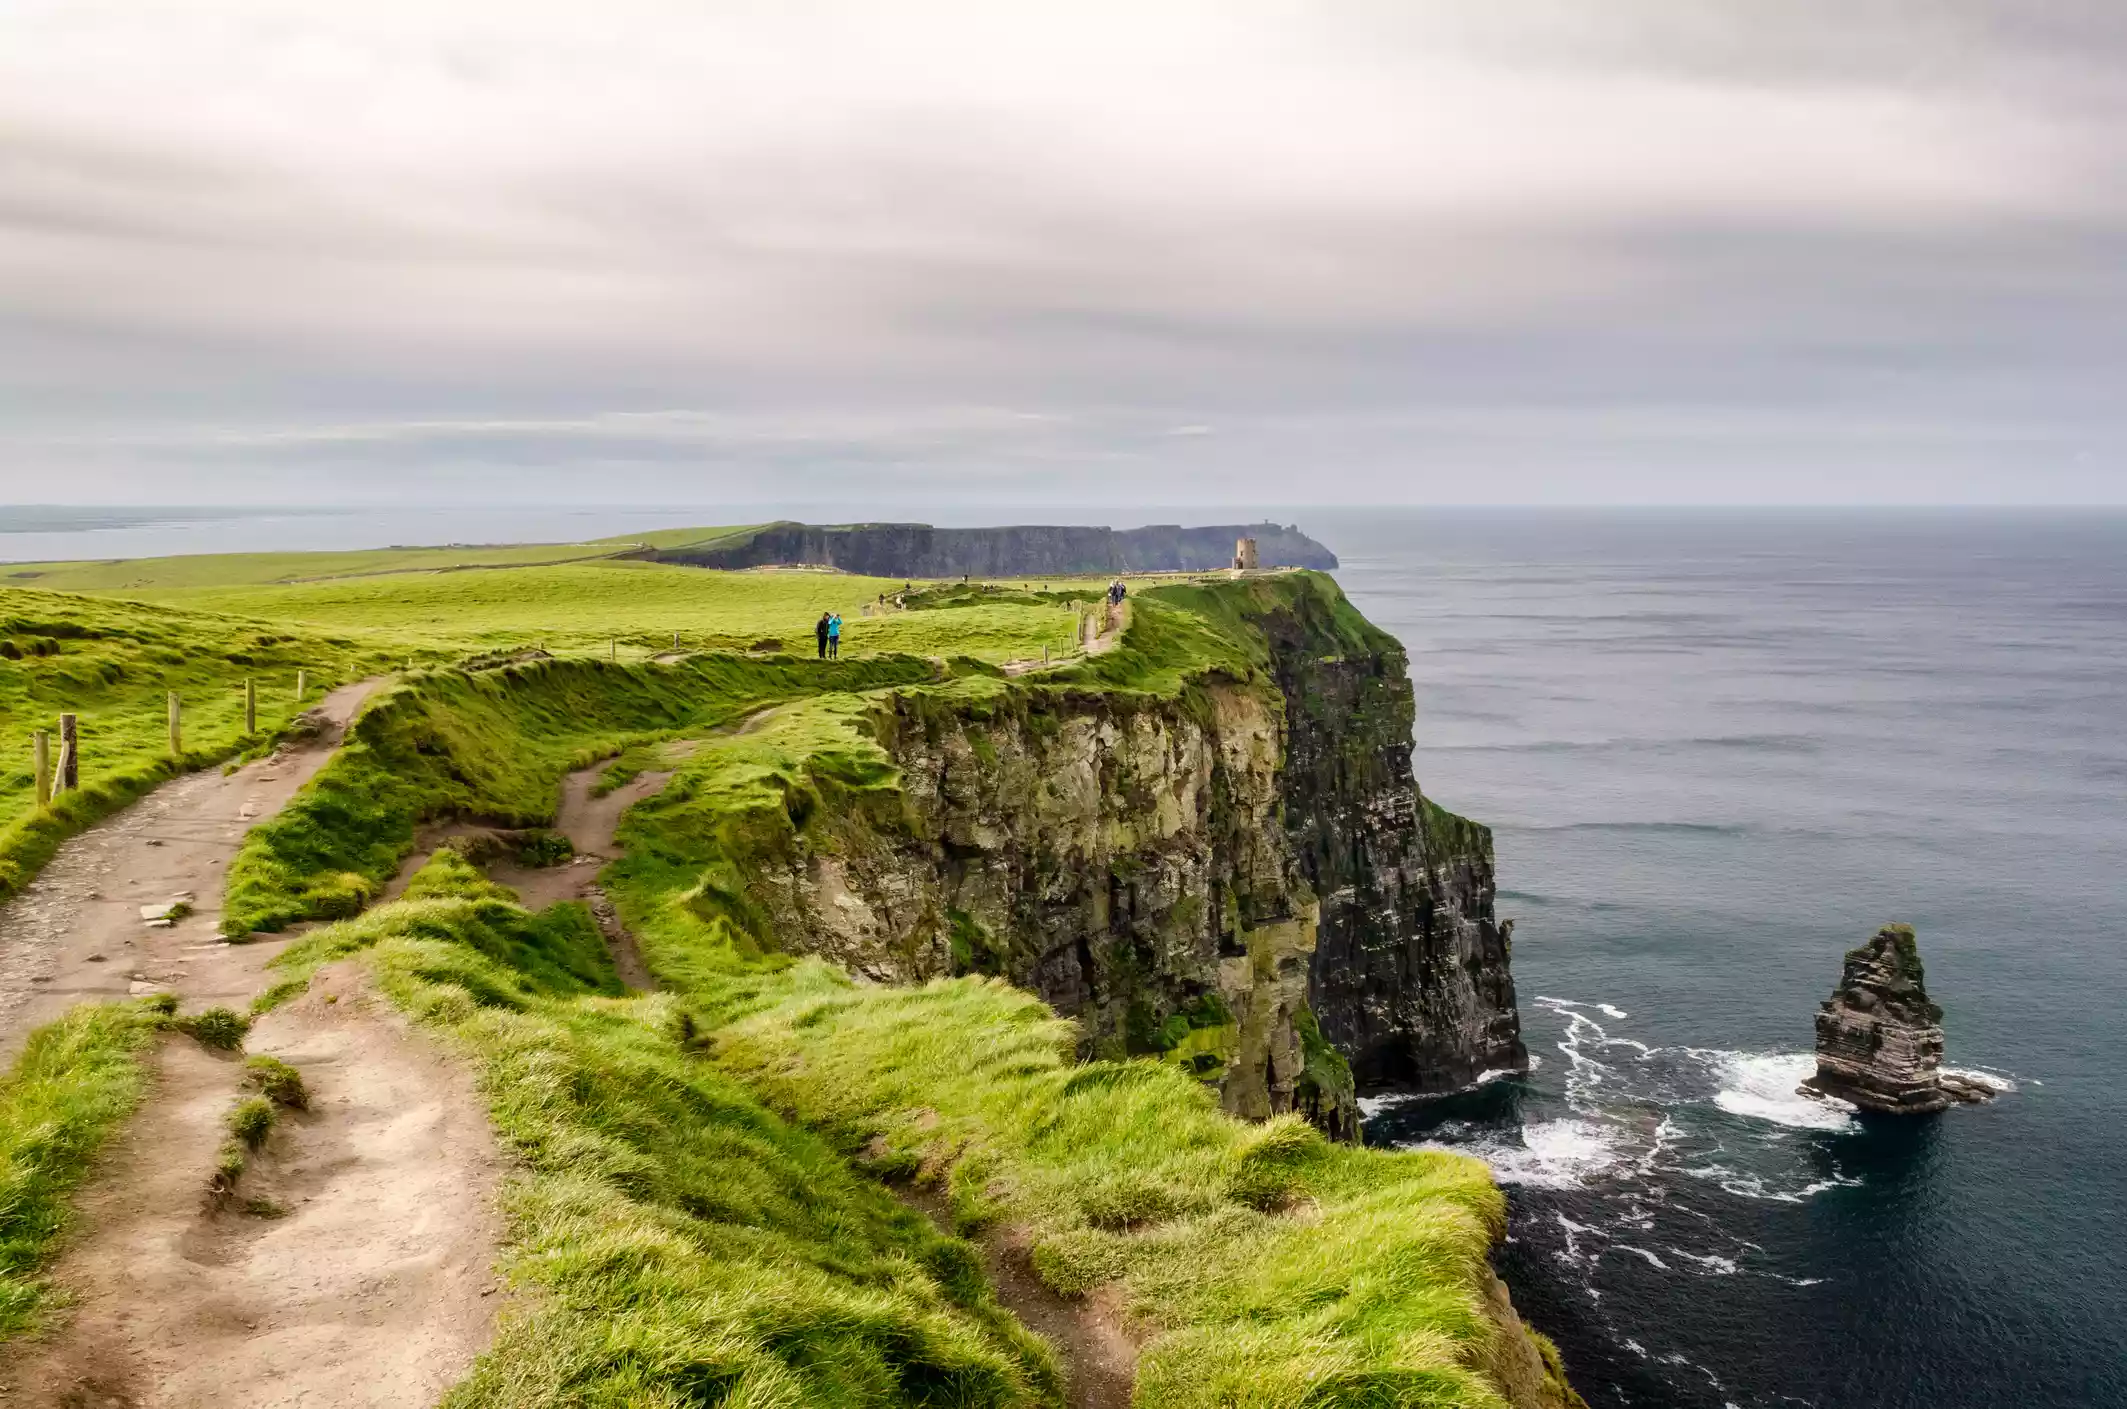 The grass-covered land above the Cliffs of Moher on a cloudy day in County Clare, Ireland